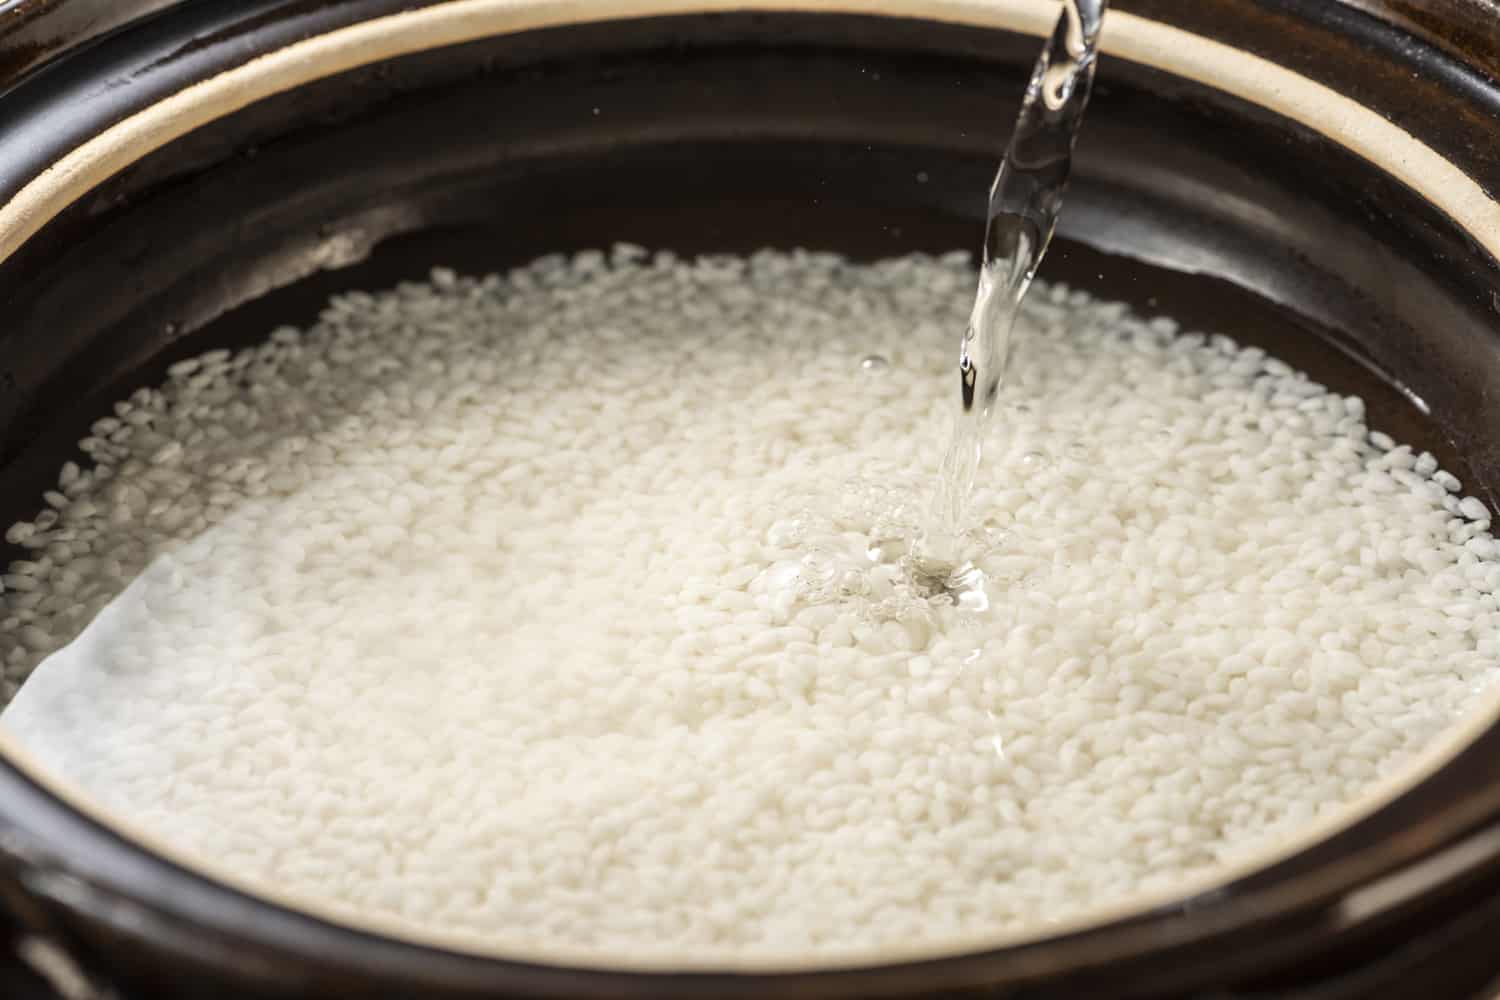 Pour water into rice